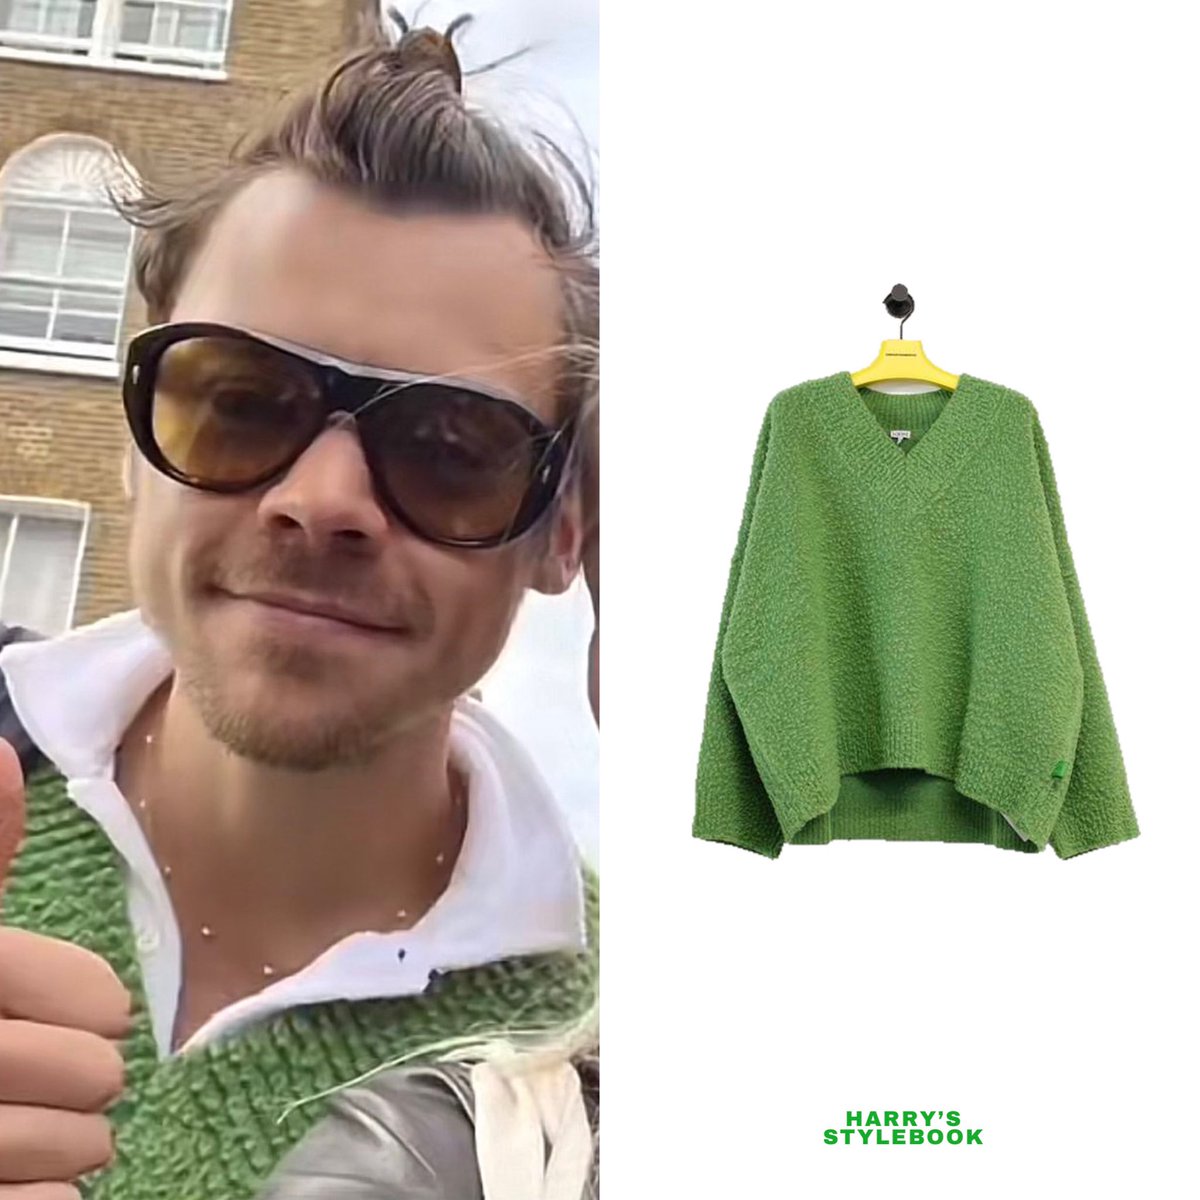 October 4, 2023
HARRY OUT IN LONDON

@LoeweOfficial ‘Wool V-Neck Textured’ sweater in the colour ‘green aloe’ ($1,950)

Worn with 
#JacquesMarieMage ‘Grand Prix’ round-frame tortoiseshell acetate sunglasses ($820)

_
📸: byrotation